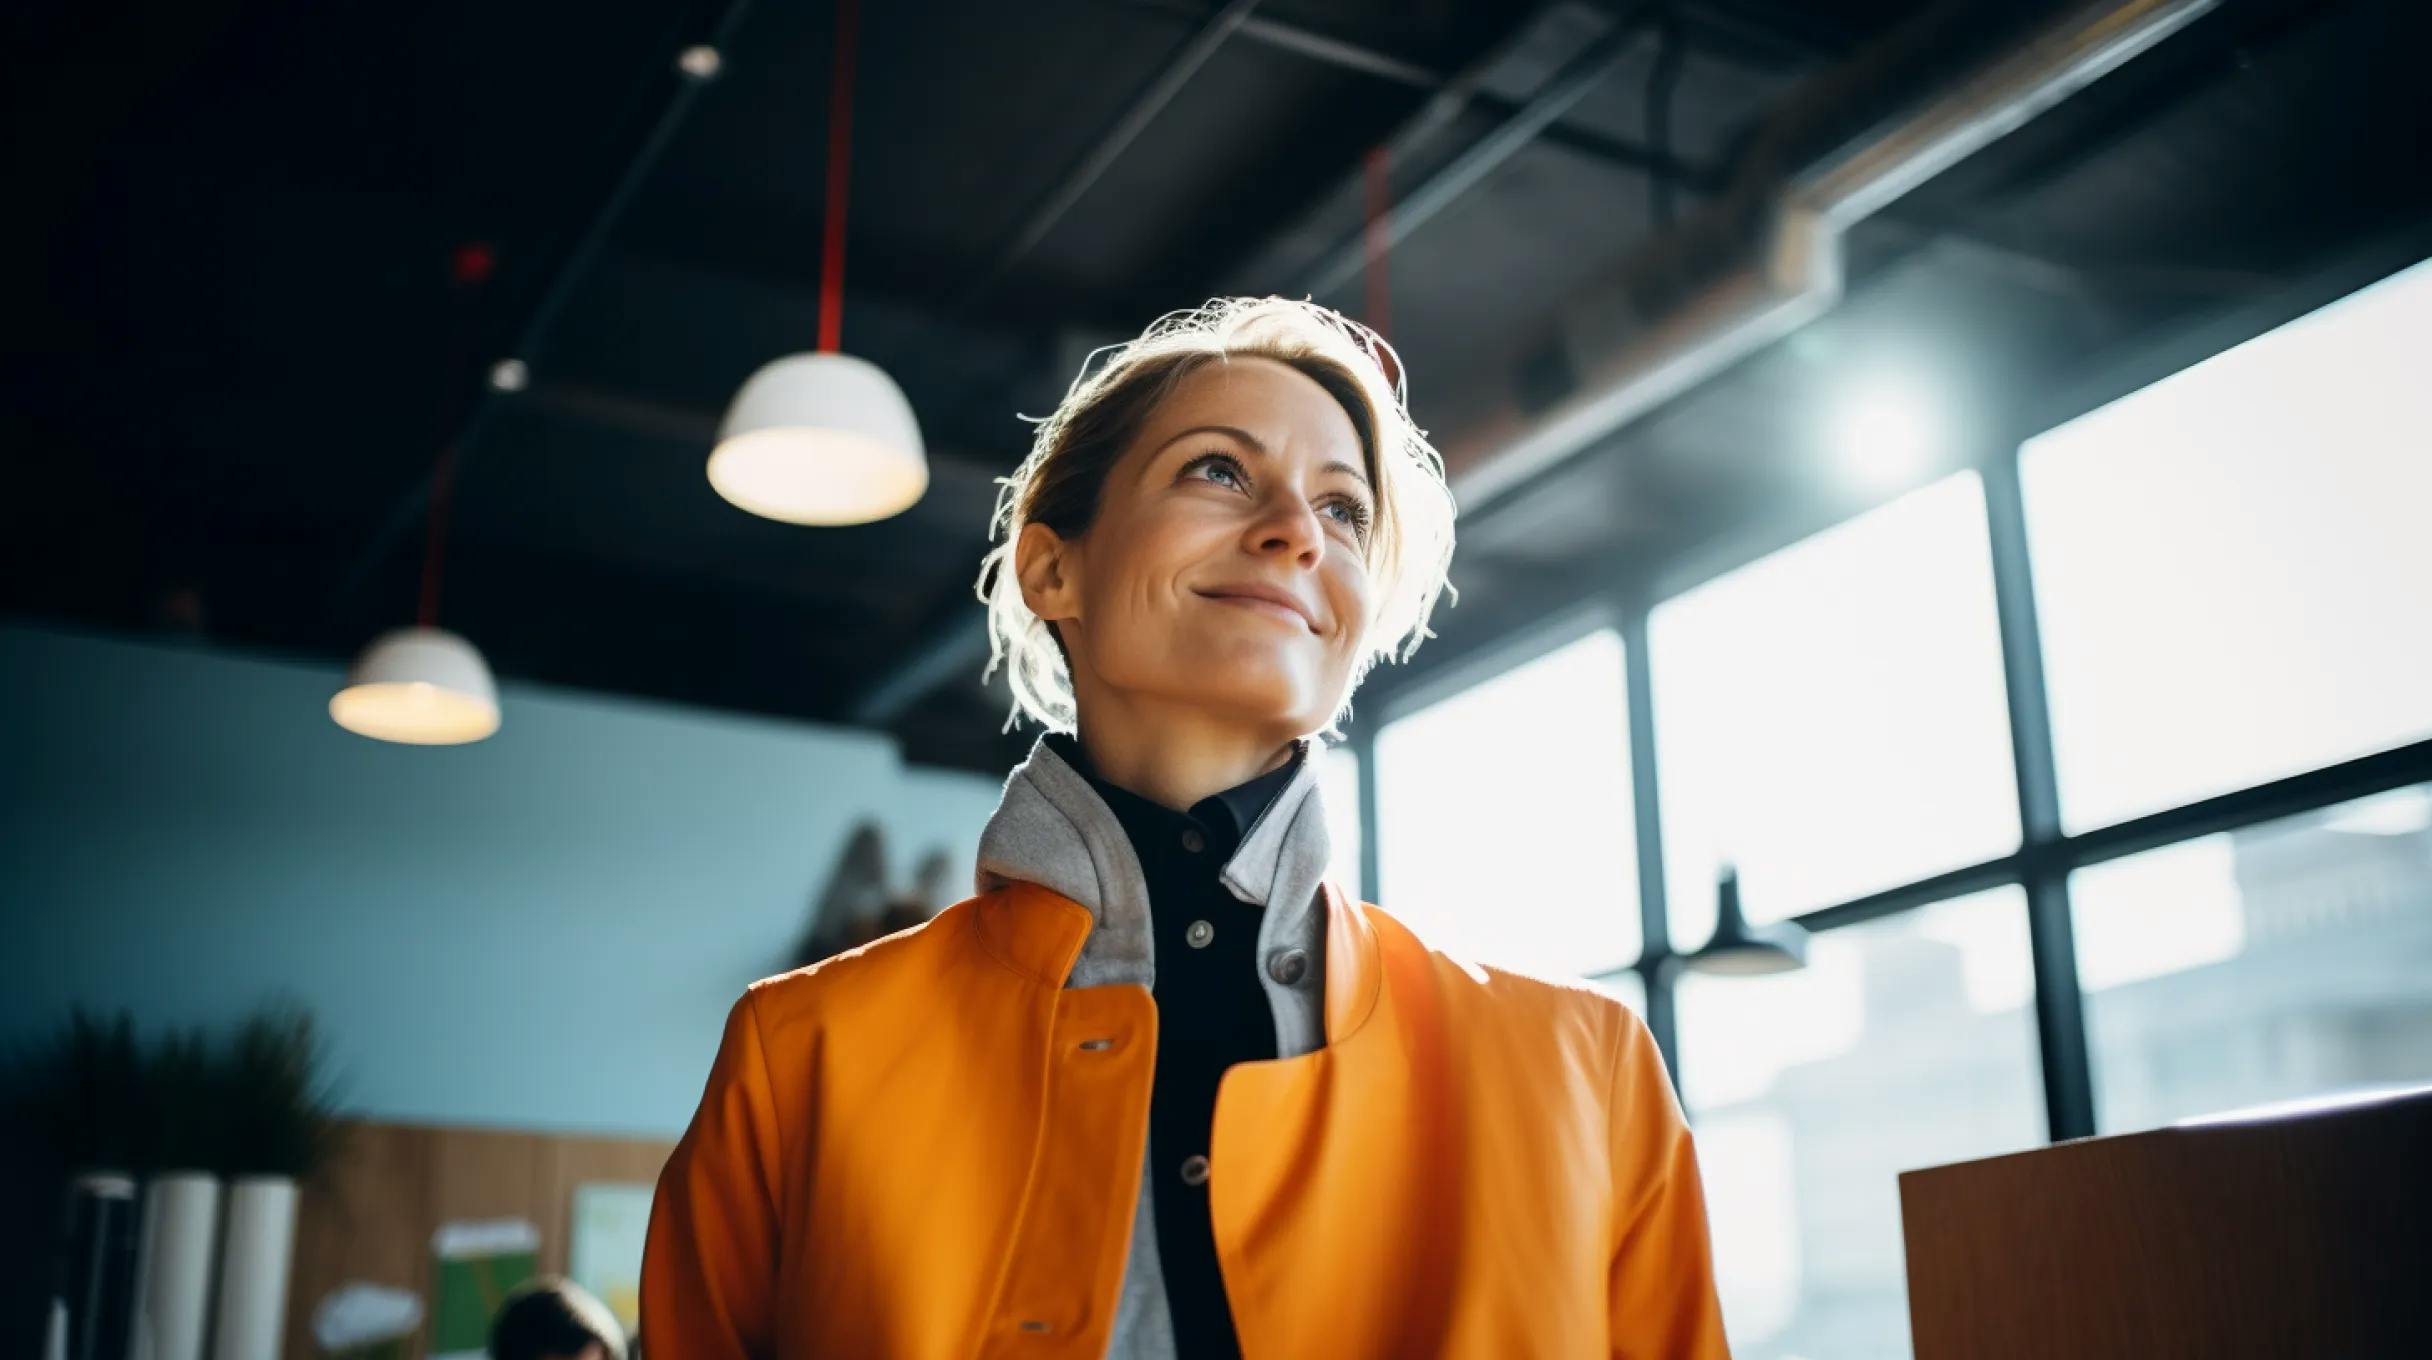  A woman in an orange jacket standing confidently in a well-lit office space.